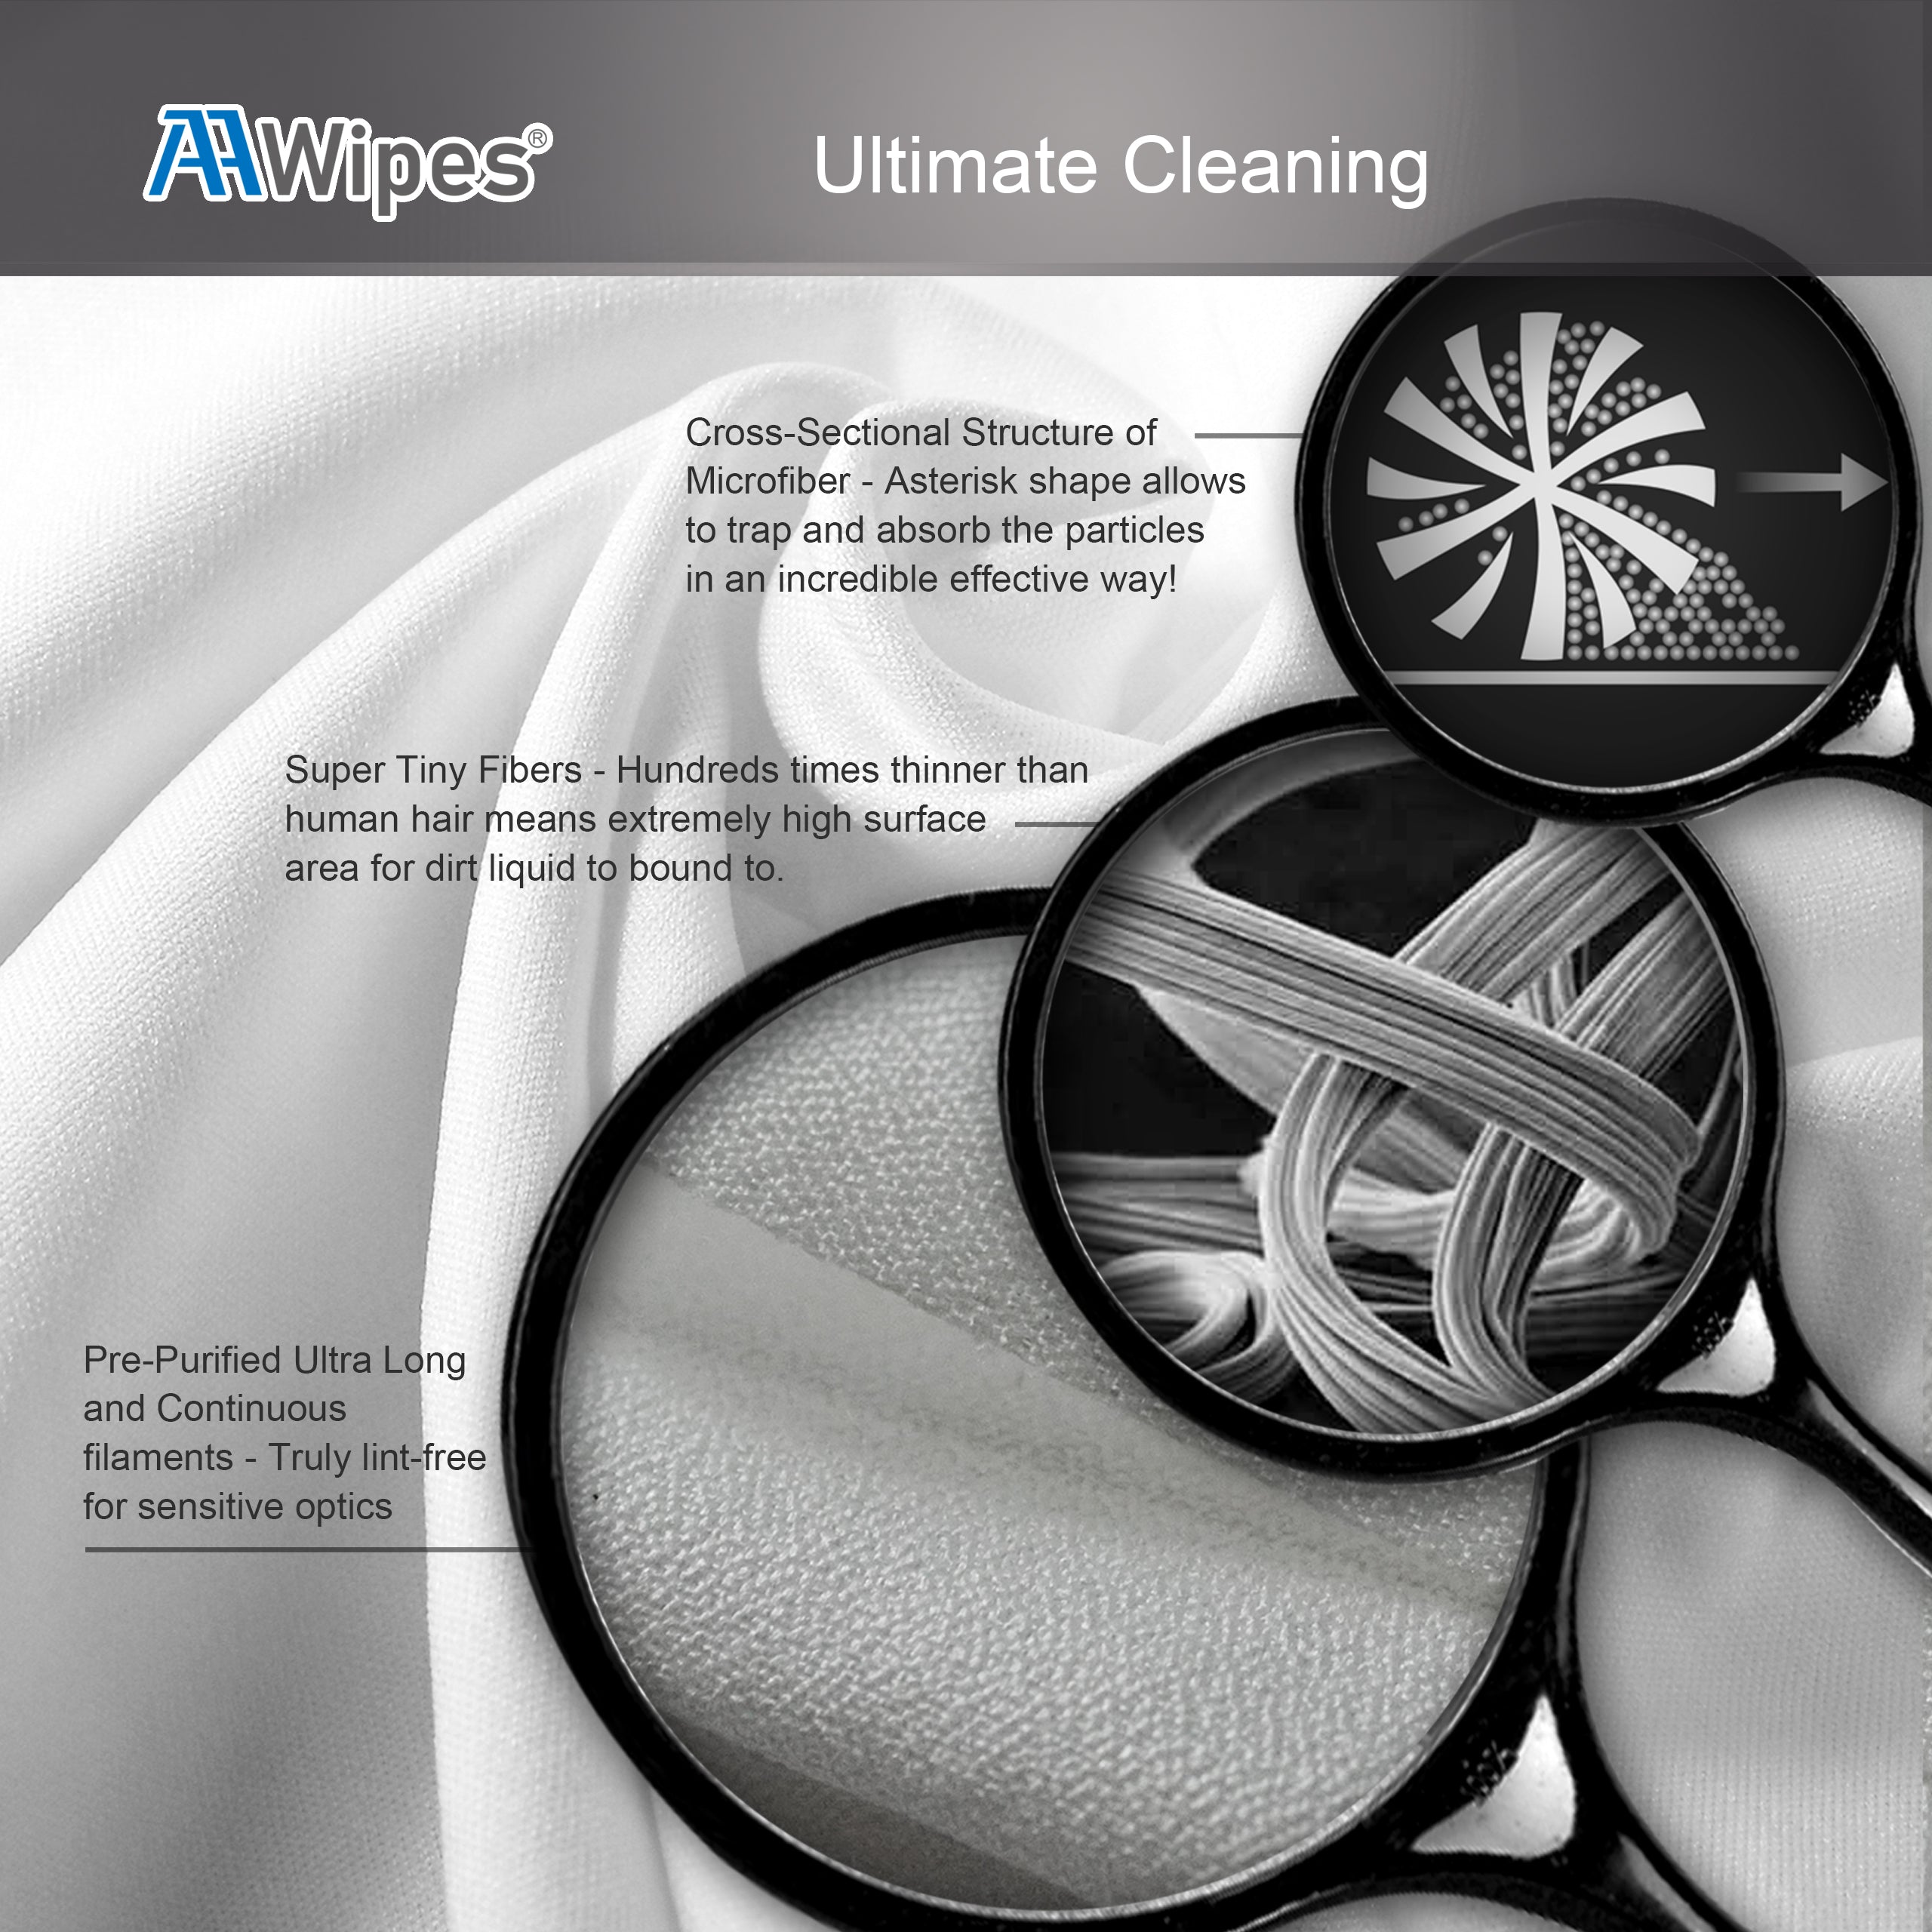 Cleanroom Ultrafine Microfiber Wipers 9"x9" (Starting at 1 Box with 2,000 Wipes per 20 Bags, 180gsm), Laser Sealed Edge, Class 100 Cloths (No. MF18009)